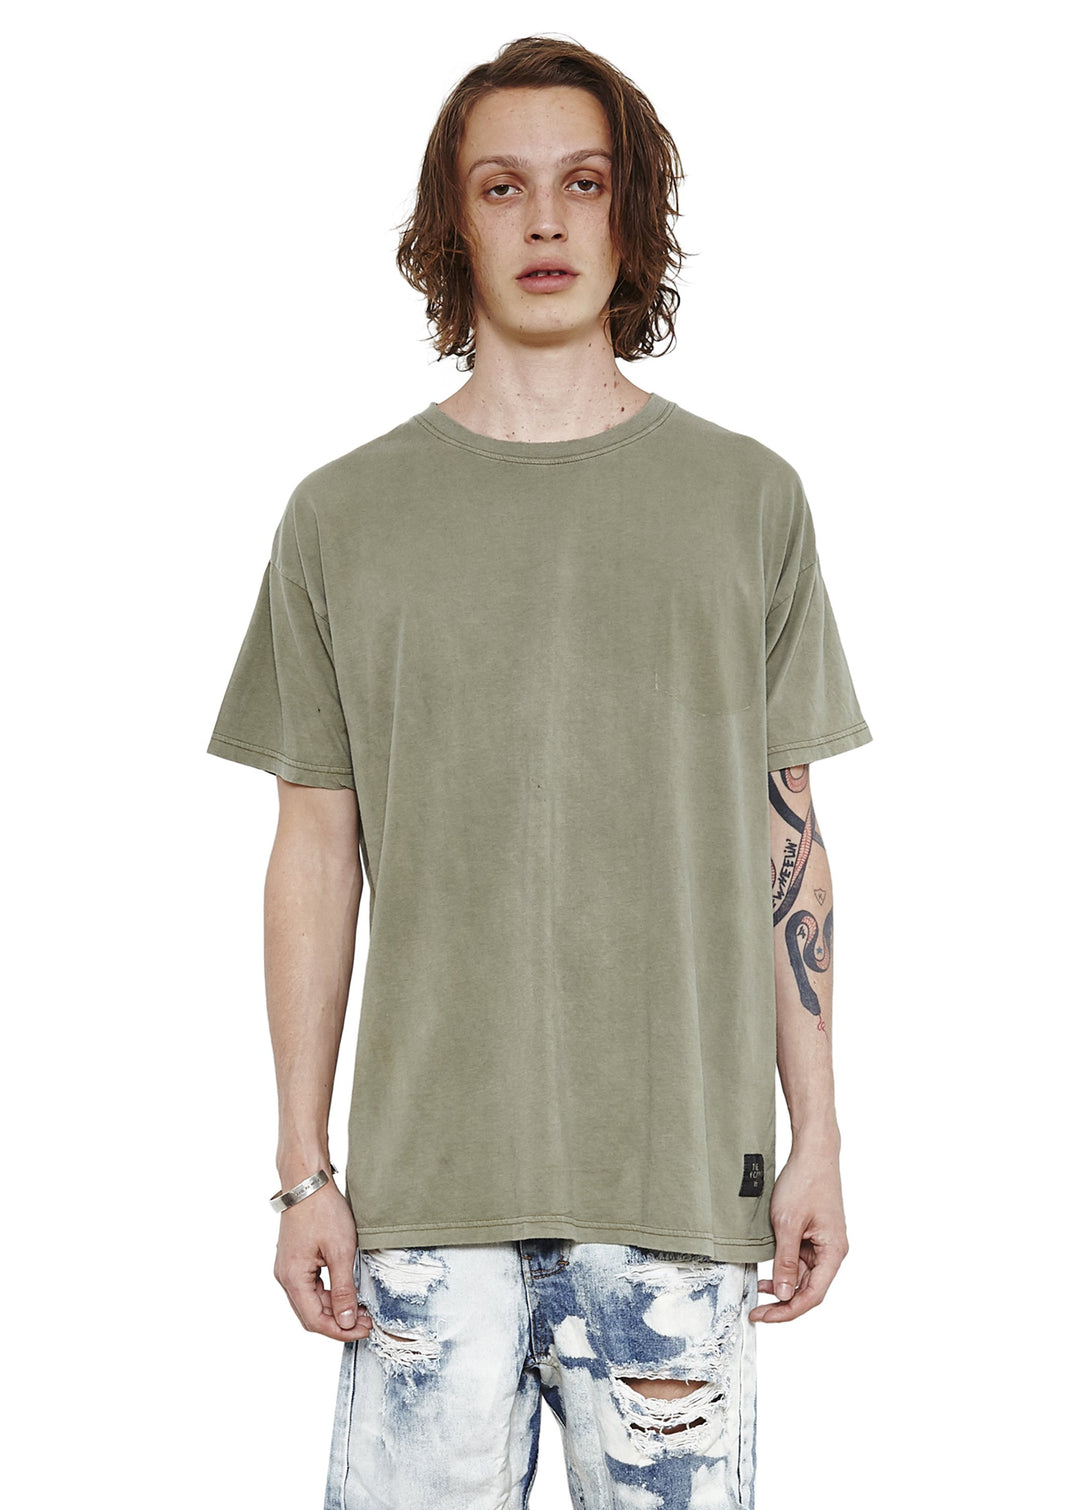 Box Vintage Tee | Green - West of Camden - Main Image Number 1 of 1